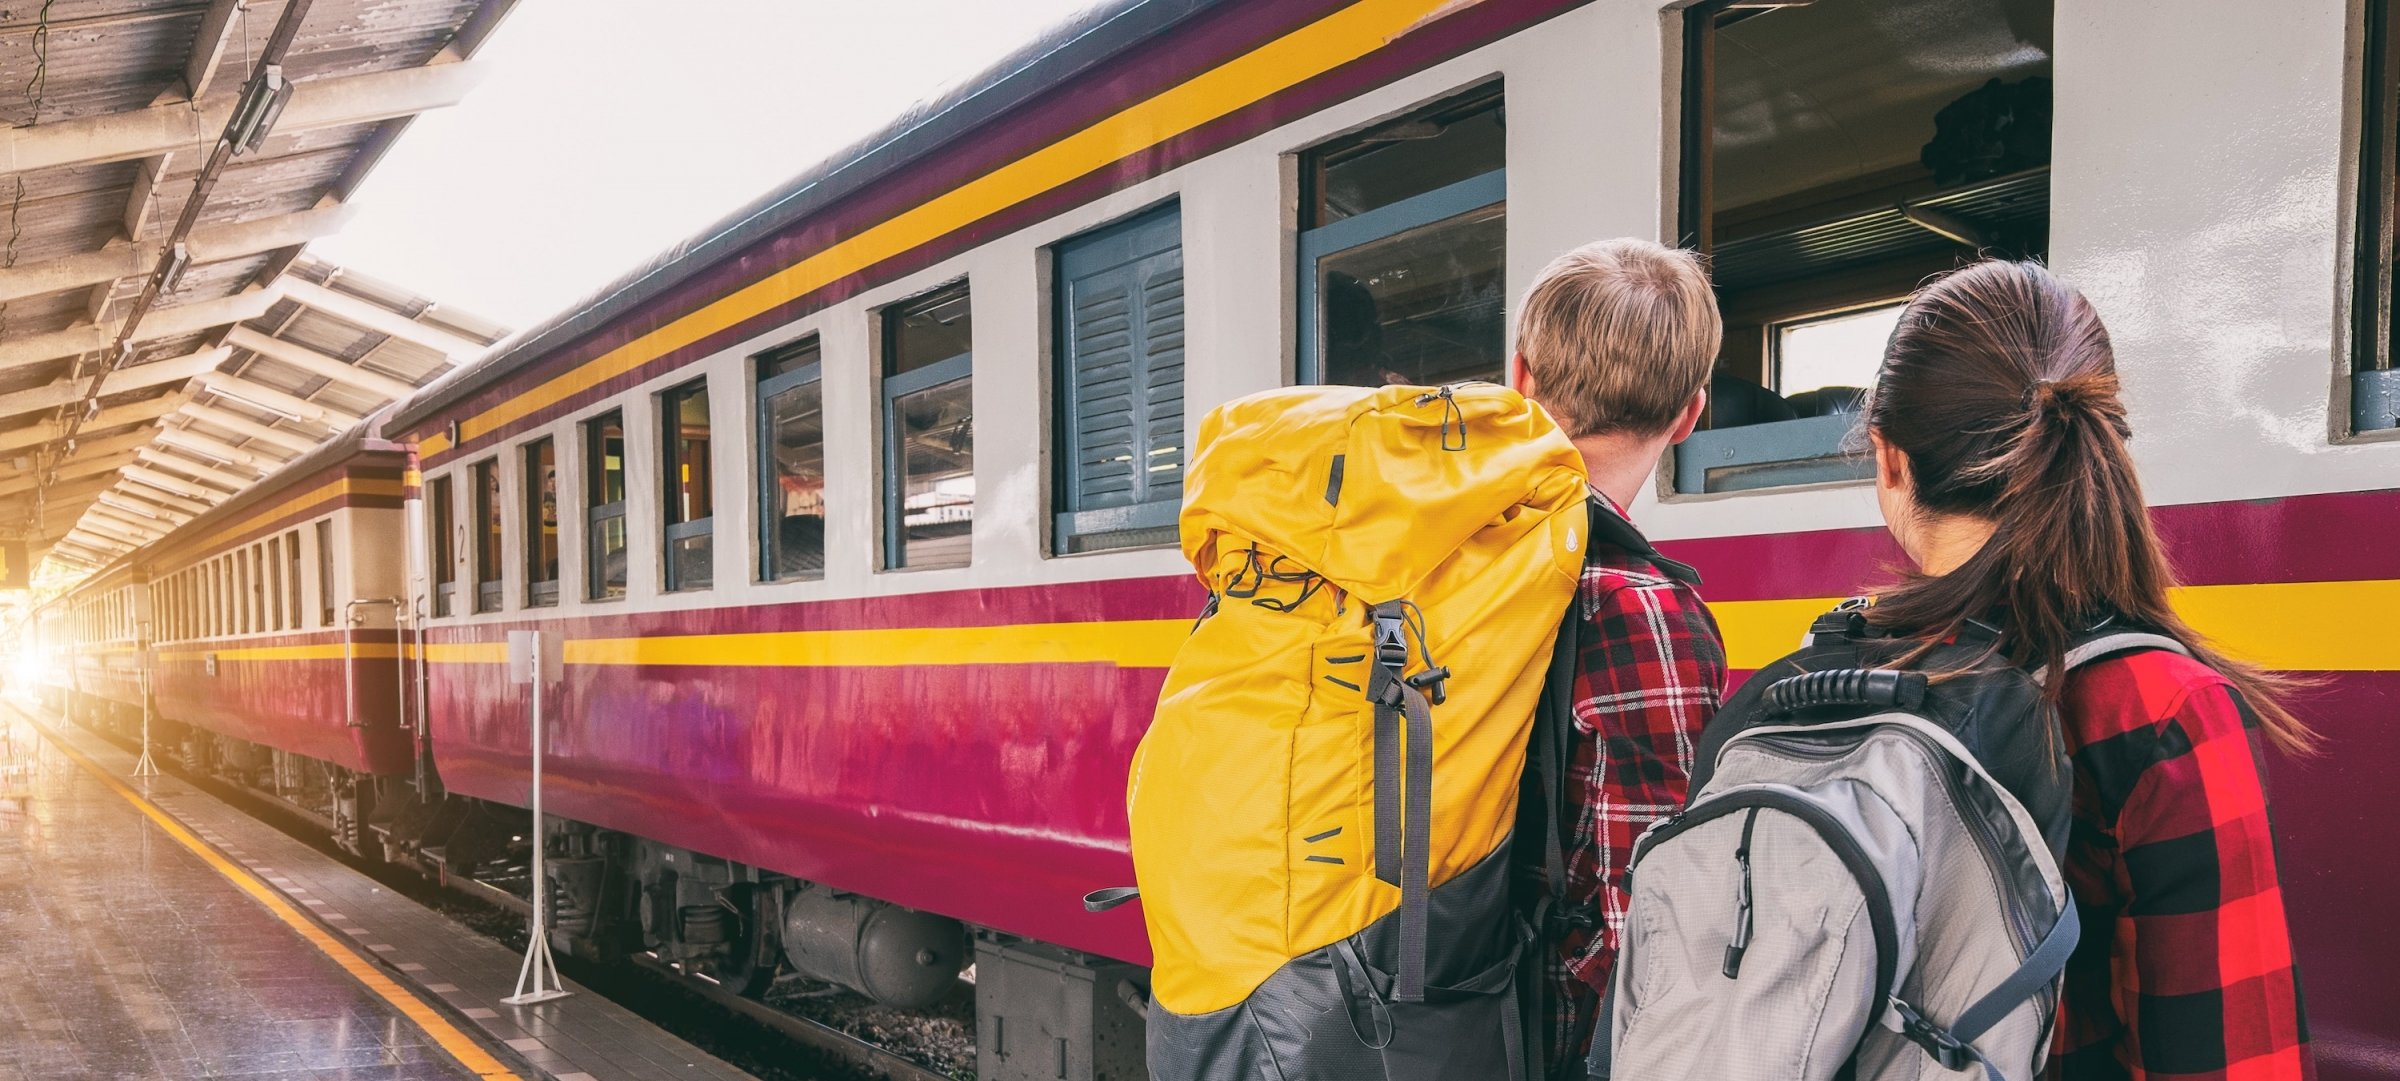 Students with back packs boarding a train.